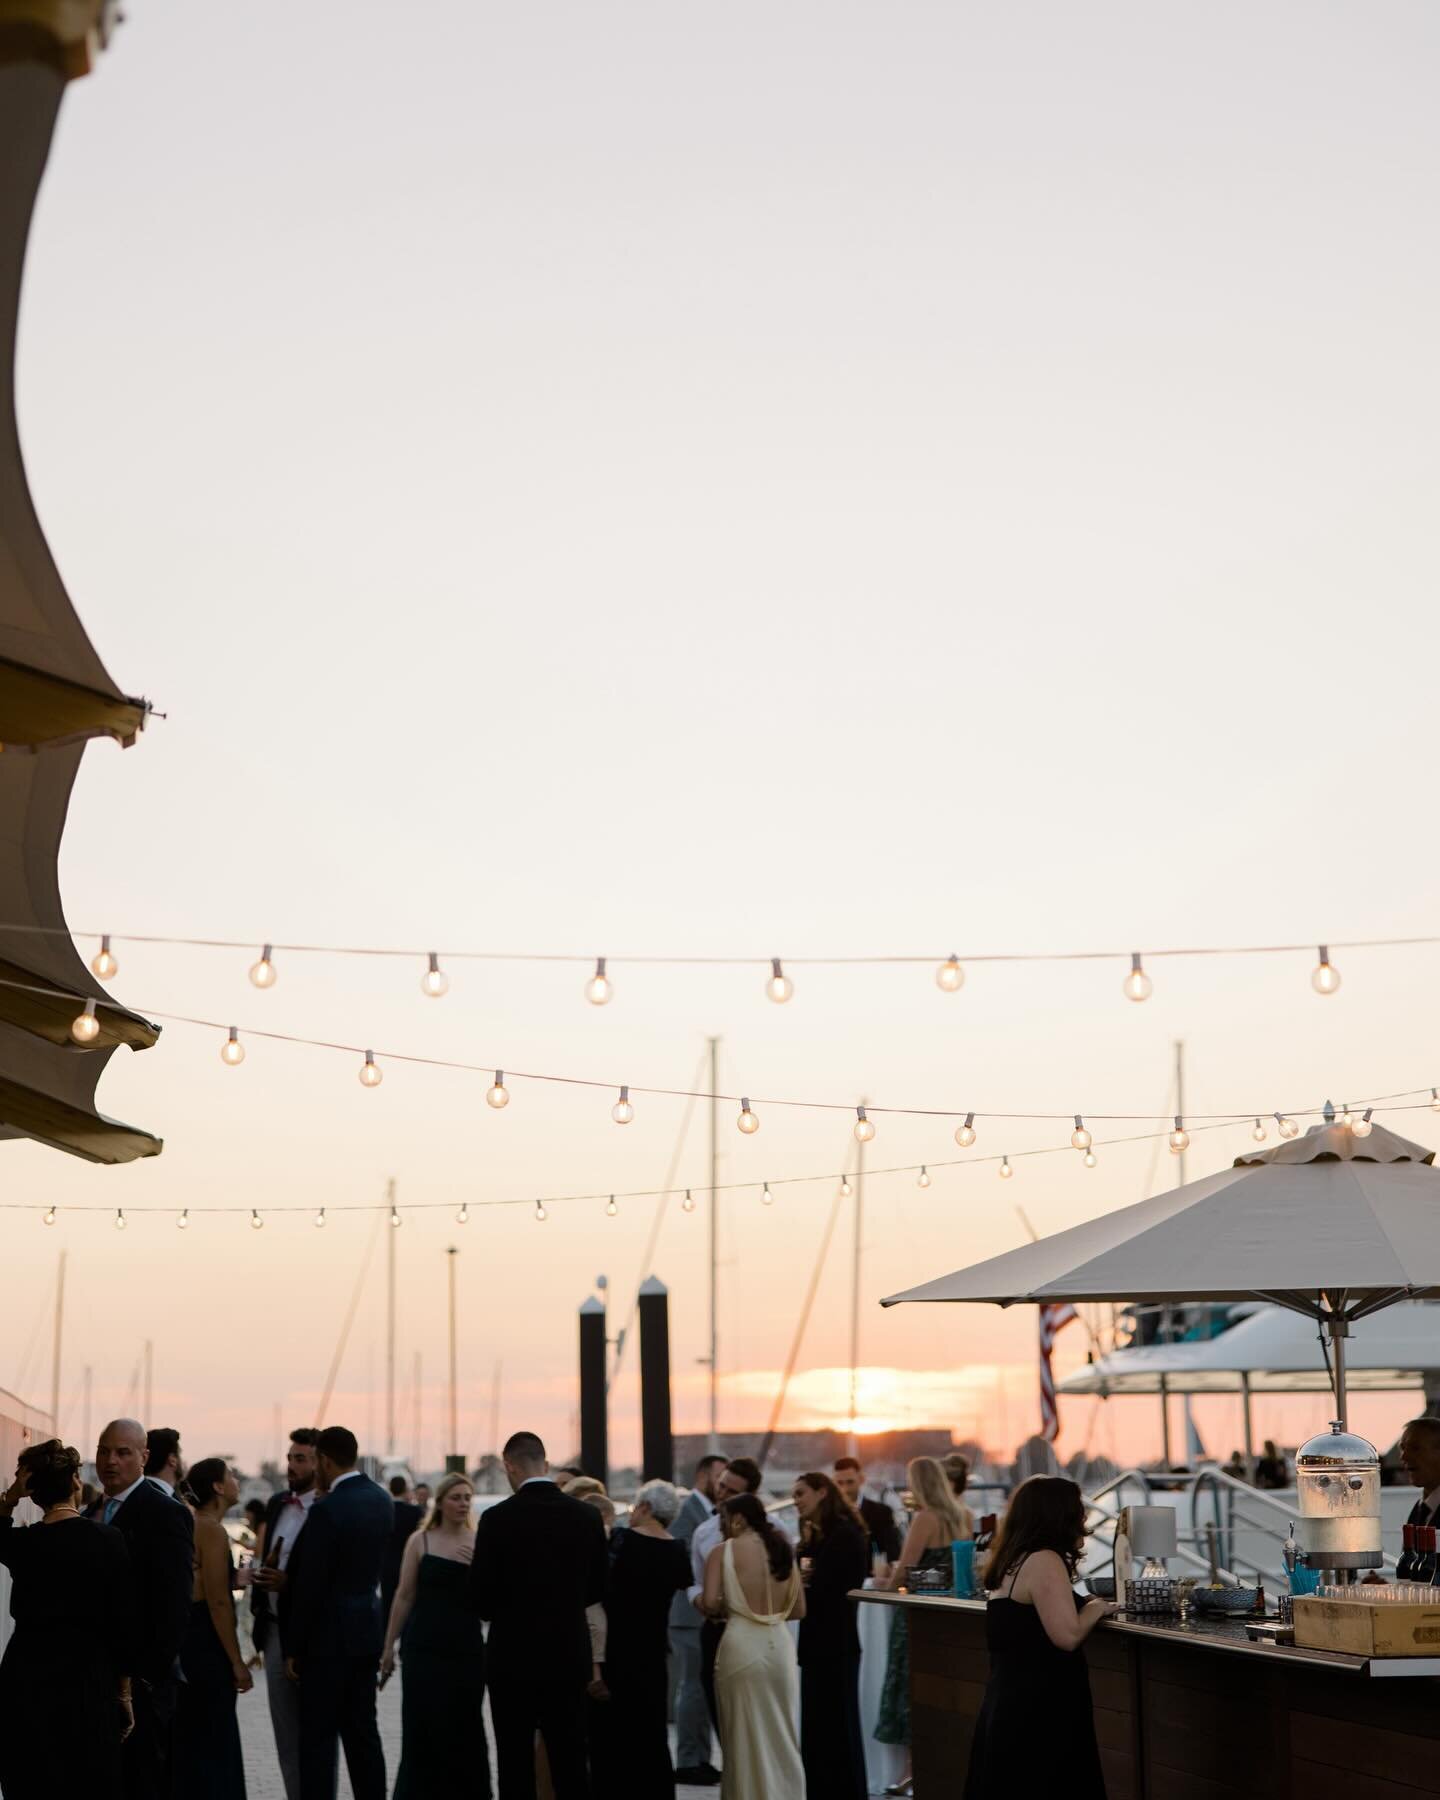 POV: you hire SKE for your summer Newport wedding. The weather is perfect and the vibes are outstanding☁️🌤️still dreaming of this happy day! 
.
.
.
.
.
.
.
.
.
.
Planning &amp; Design: @stephaniekingevents 
Wedding Venue: @bohlinnewport 
Photography